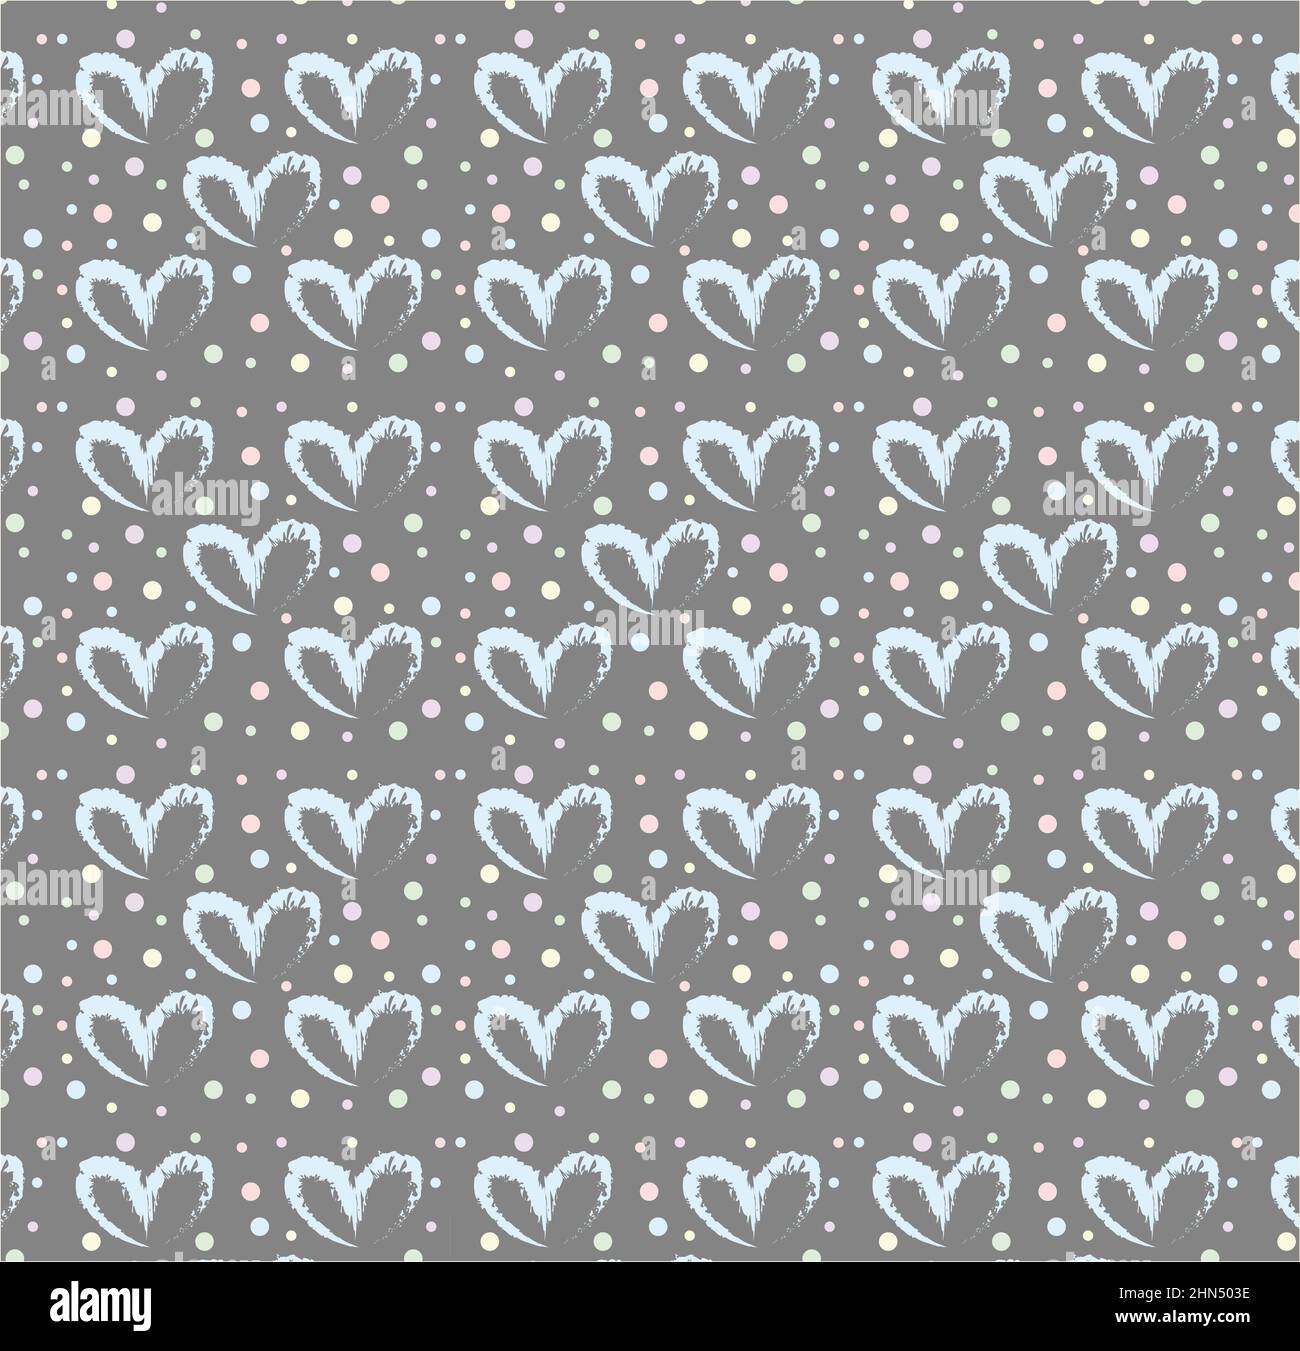 Seamless pattern of hand drawn simple hearts in blue on gray background with colored dots in pastel rainbow colors Stock Photo